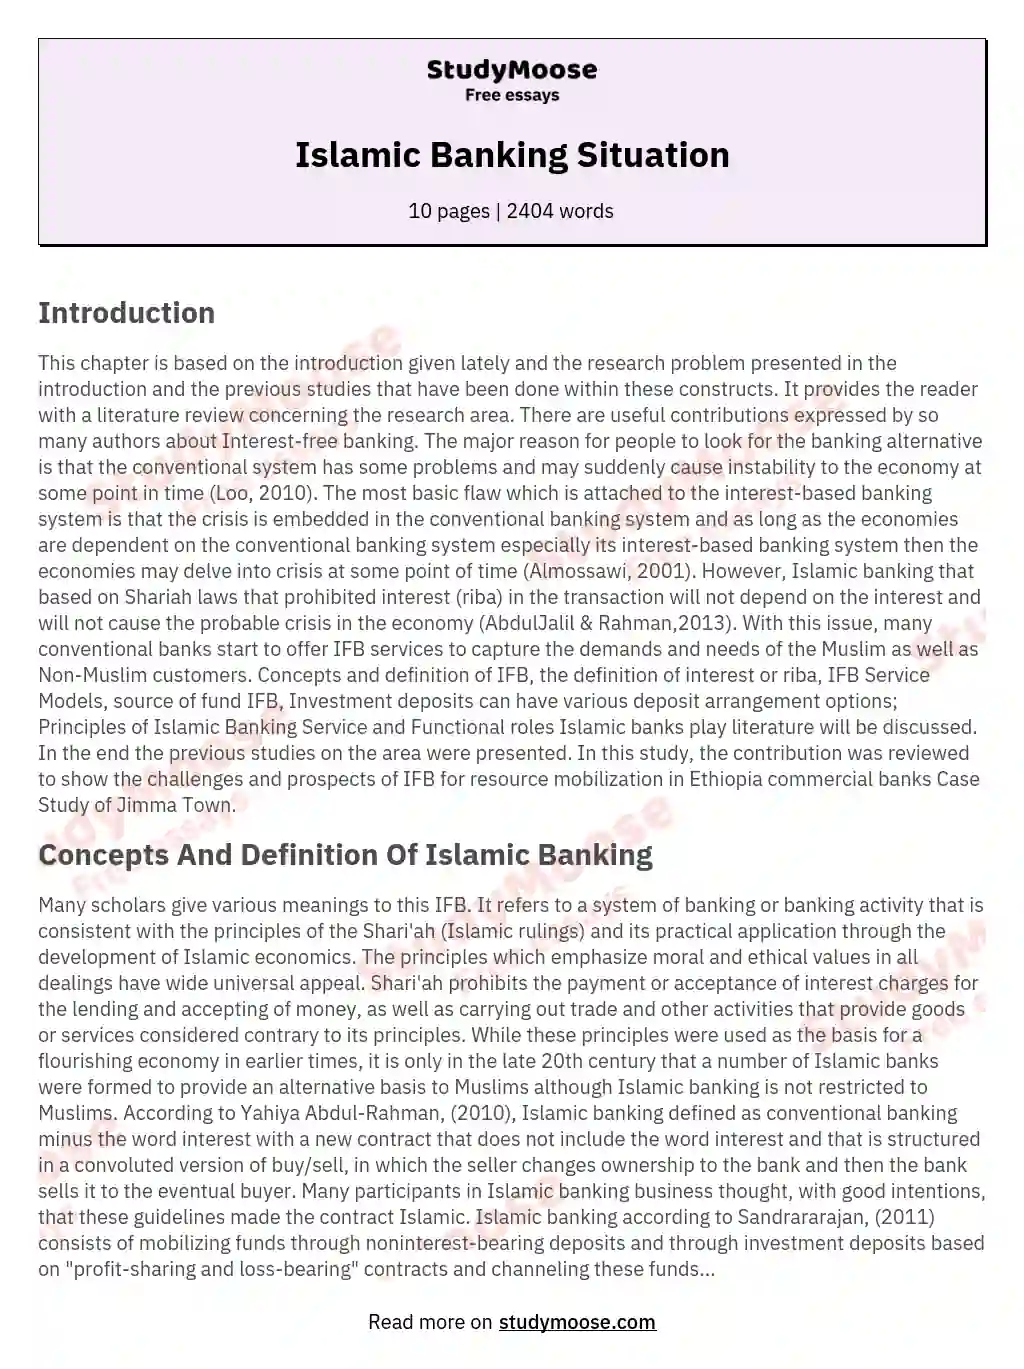 Islamic Banking Situation essay